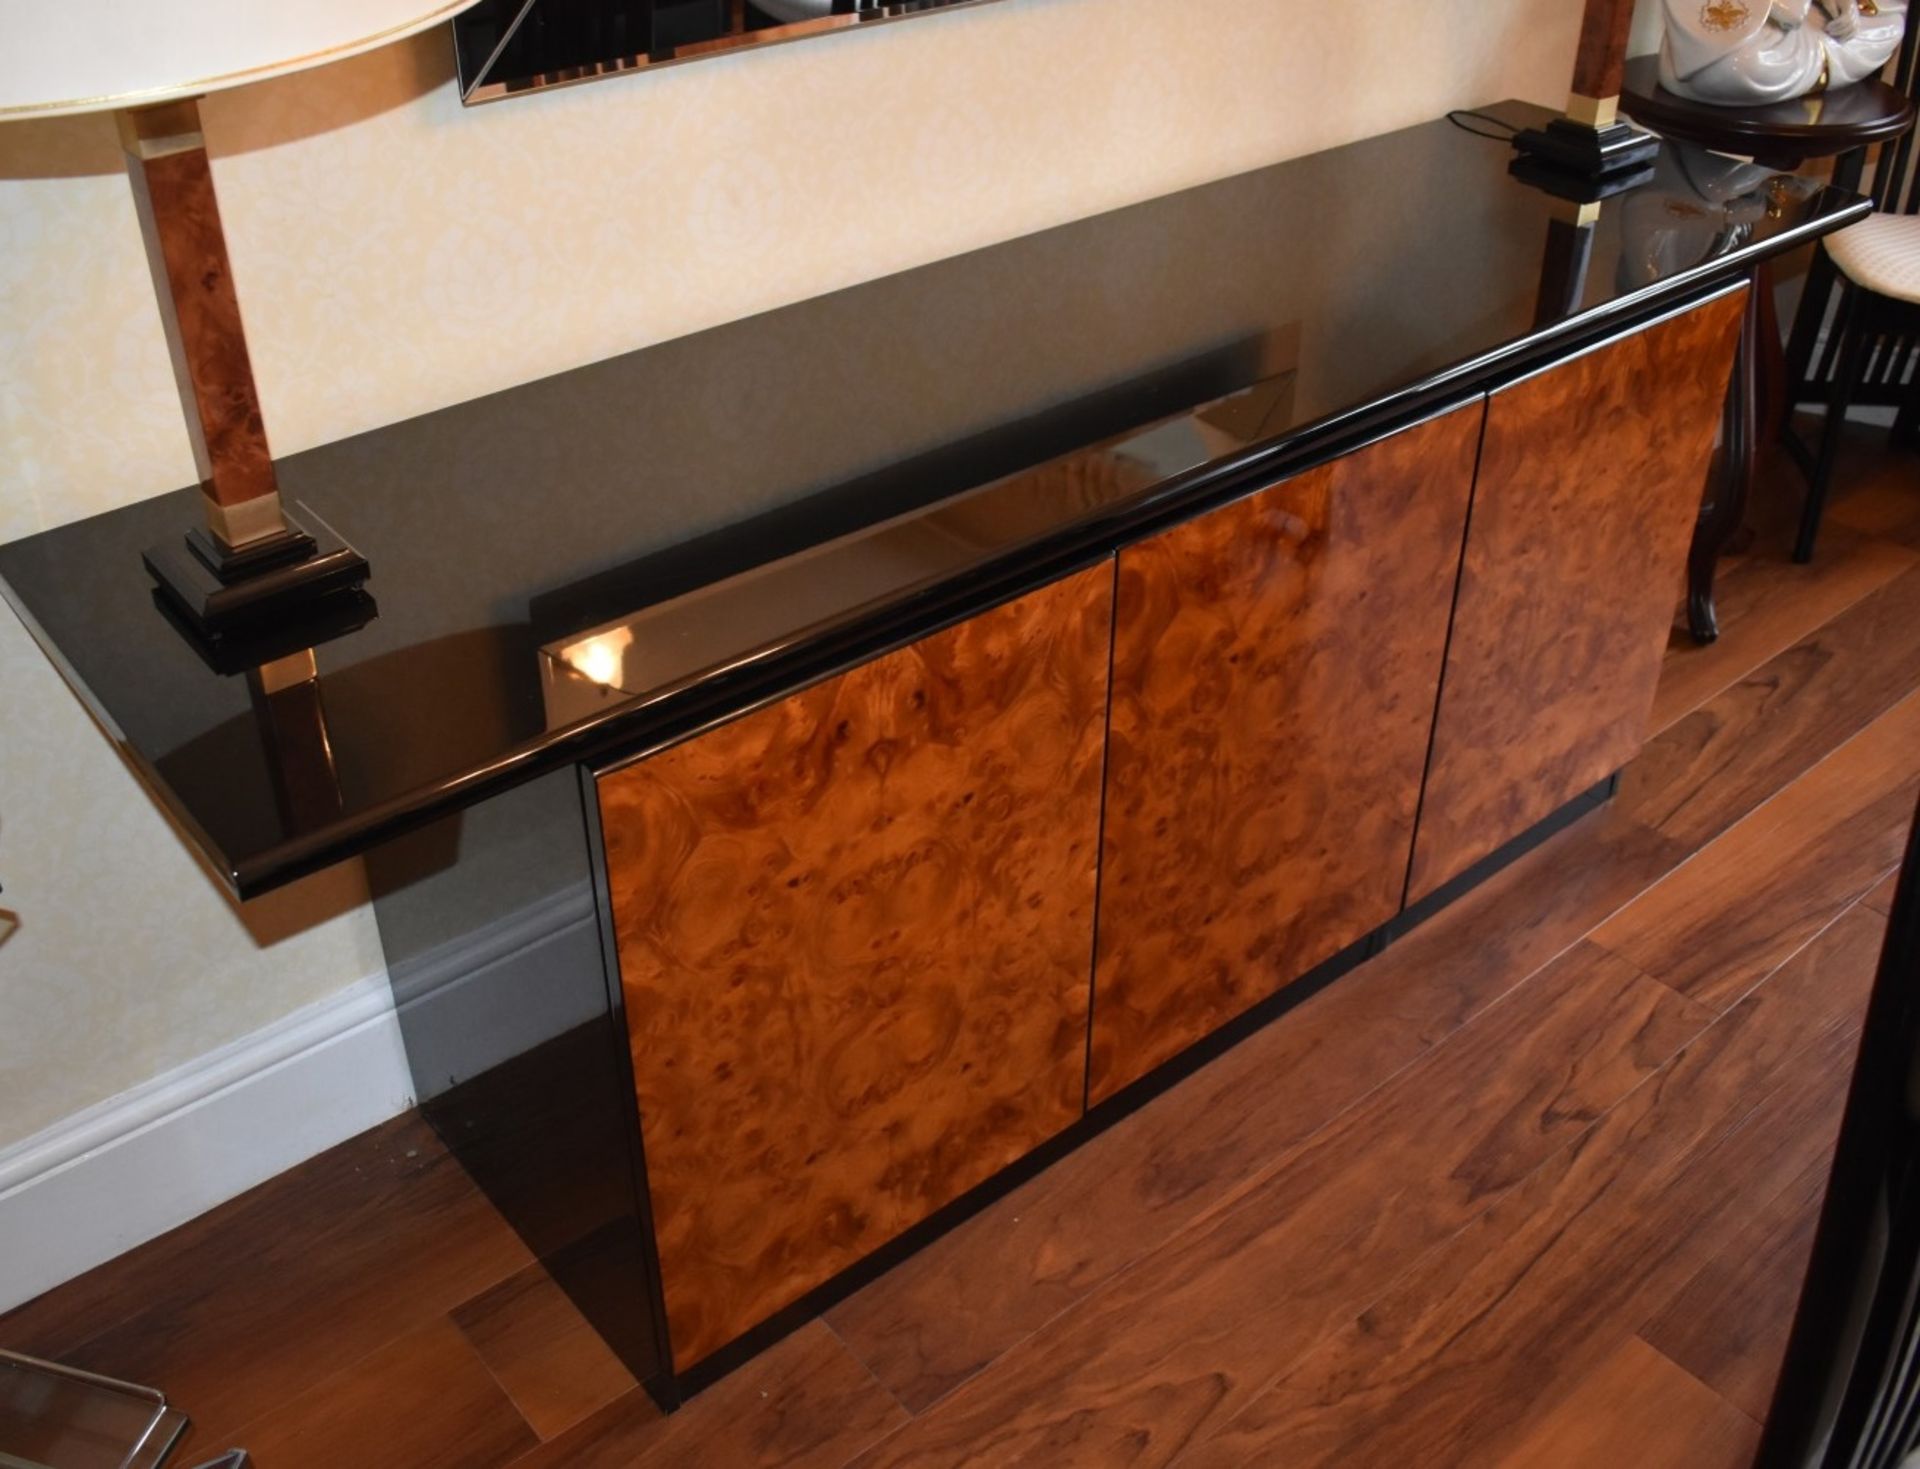 1 x Contemporary Three Door Sideboard With Dark Gloss Finish and Burr Walnut Doors - Dimensions - Image 7 of 10